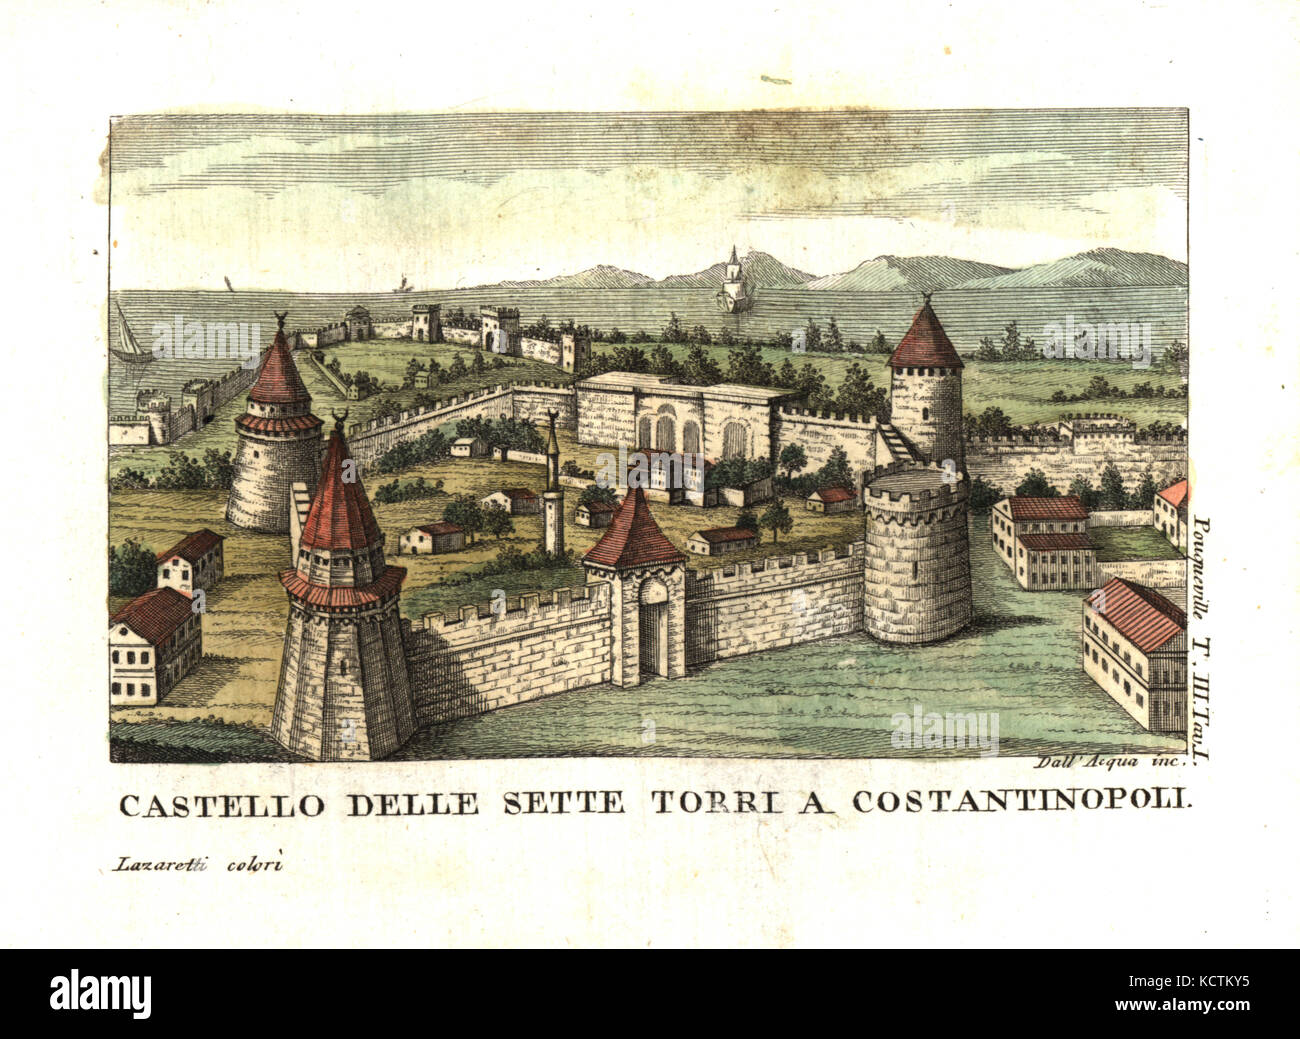 Castle of the Seven Towers (Yedikule Fortress), Constantinople (Istanbul), Turkey. Illustration from Francois Pouqueville’s Travels through More, Albania and several other parts of the Ottoman Empire, 1805. Copperplate engraving by Dell'Acqua handcoloured by Lazaretti from Giovanni Battista Sonzogno’s Collection of the Most Interesting Voyages (Raccolta de Viaggi Piu Interessanti), Milan, 1815-1817. Stock Photo